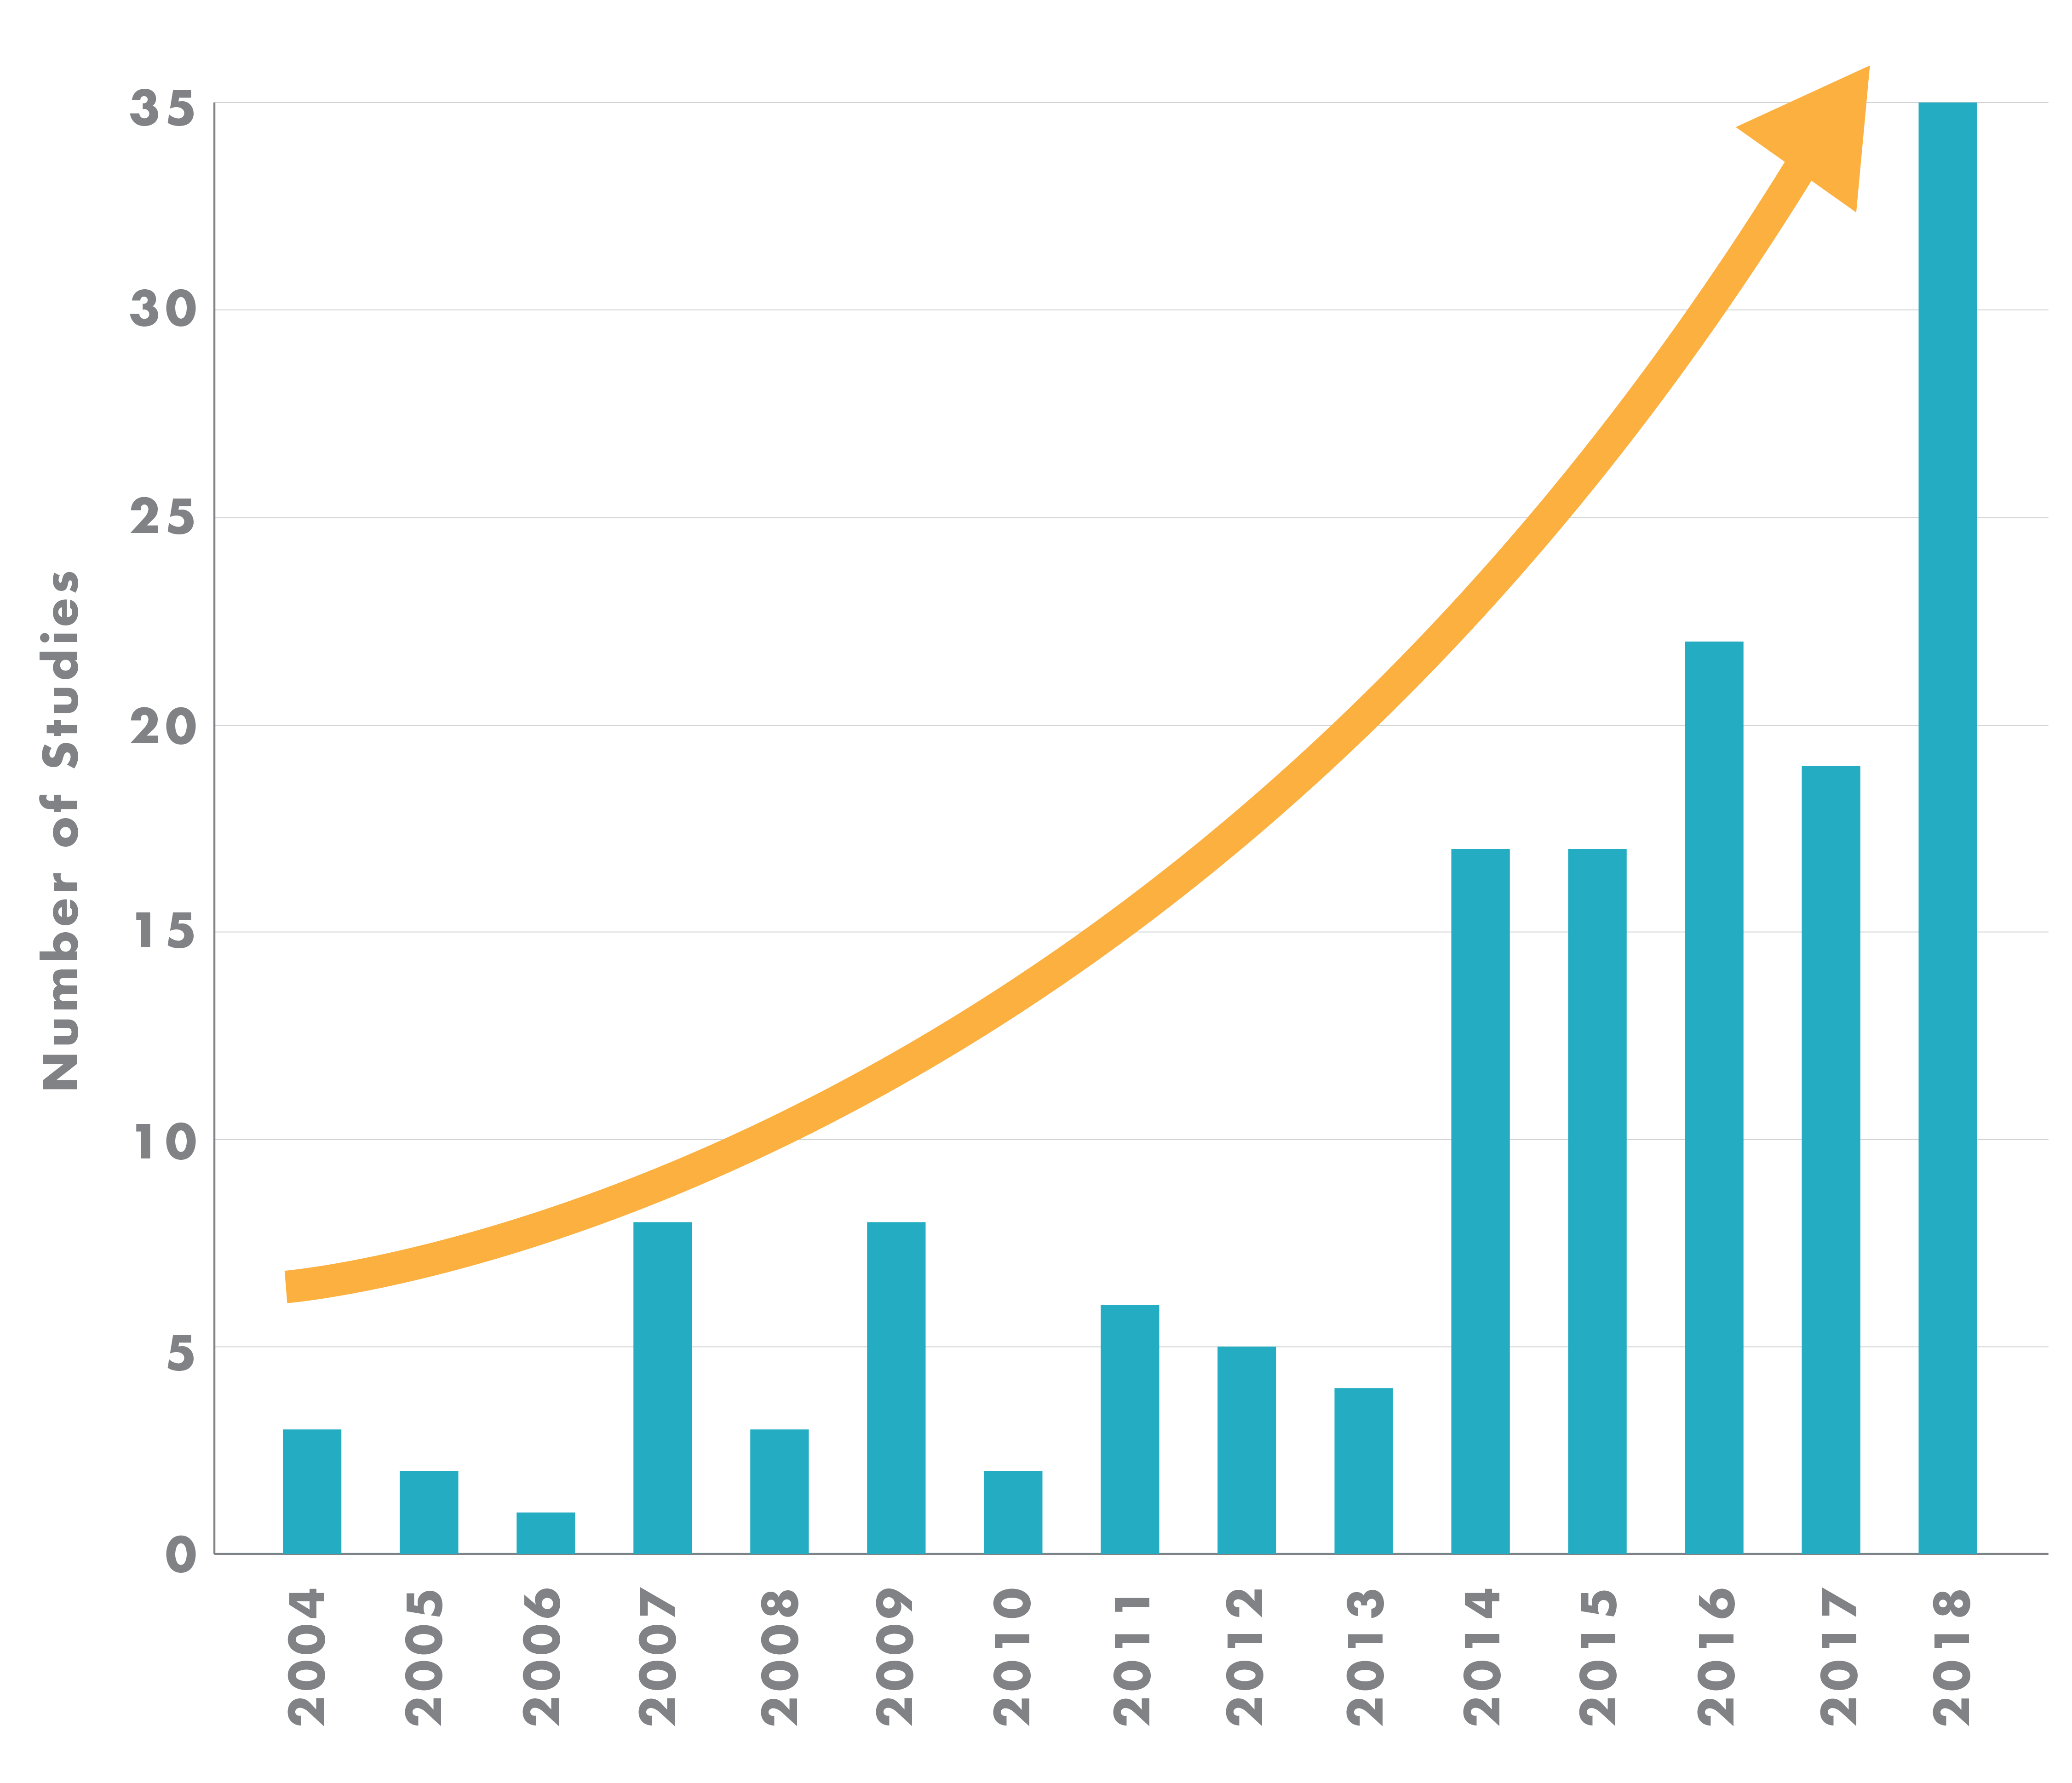 Chart showing number of articles and studies conducted on NR between 2004 and 2018